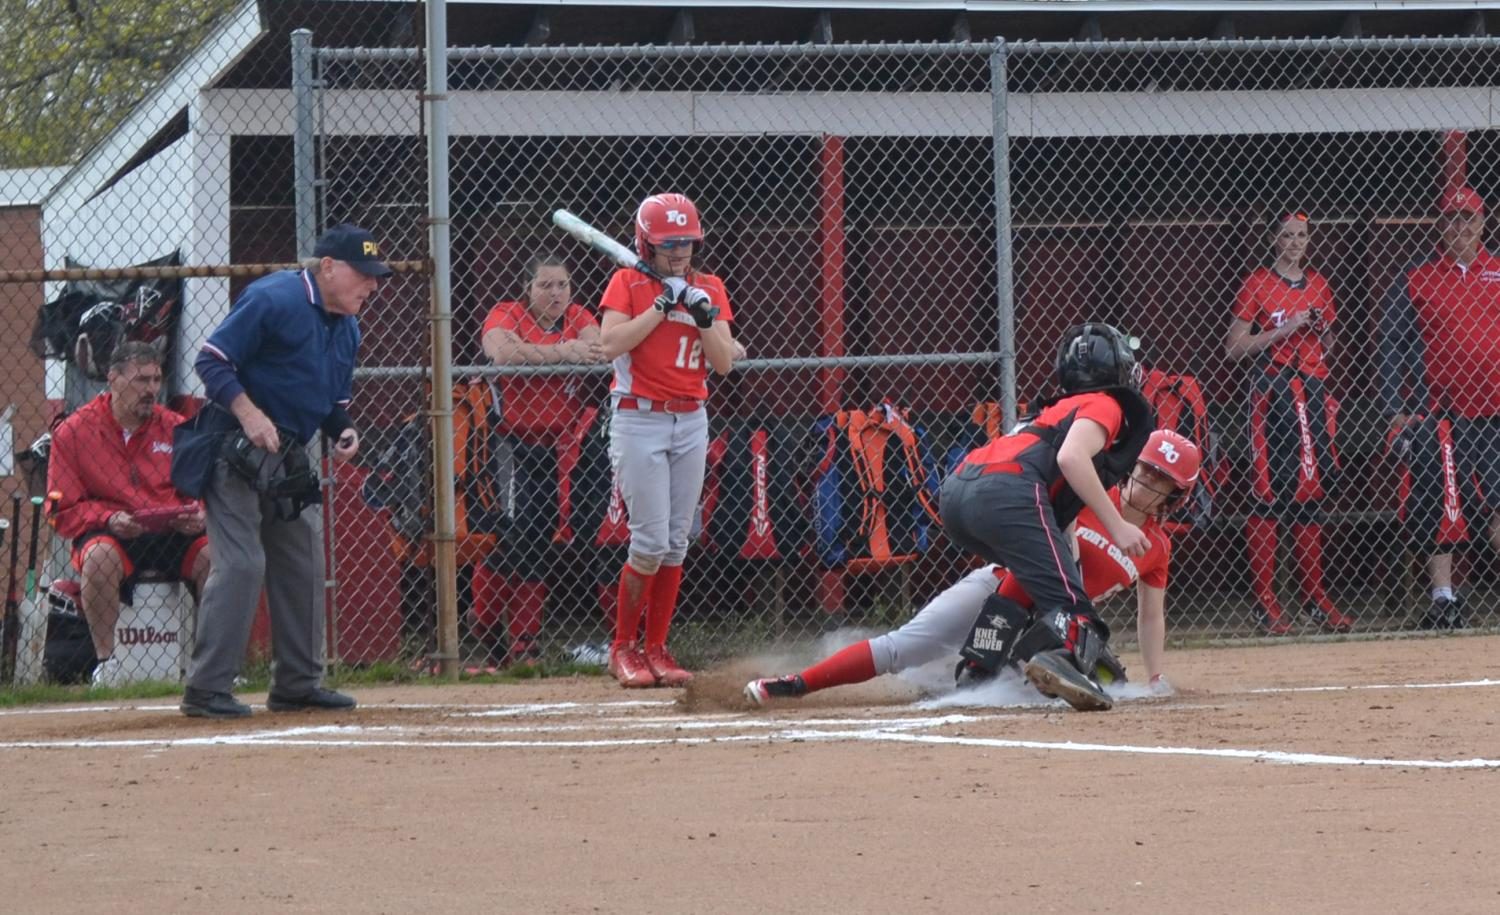 Sophomore catcher Trisha Speicher tags a runner out at home plate during a game on April 21 against Fort Cherry.
